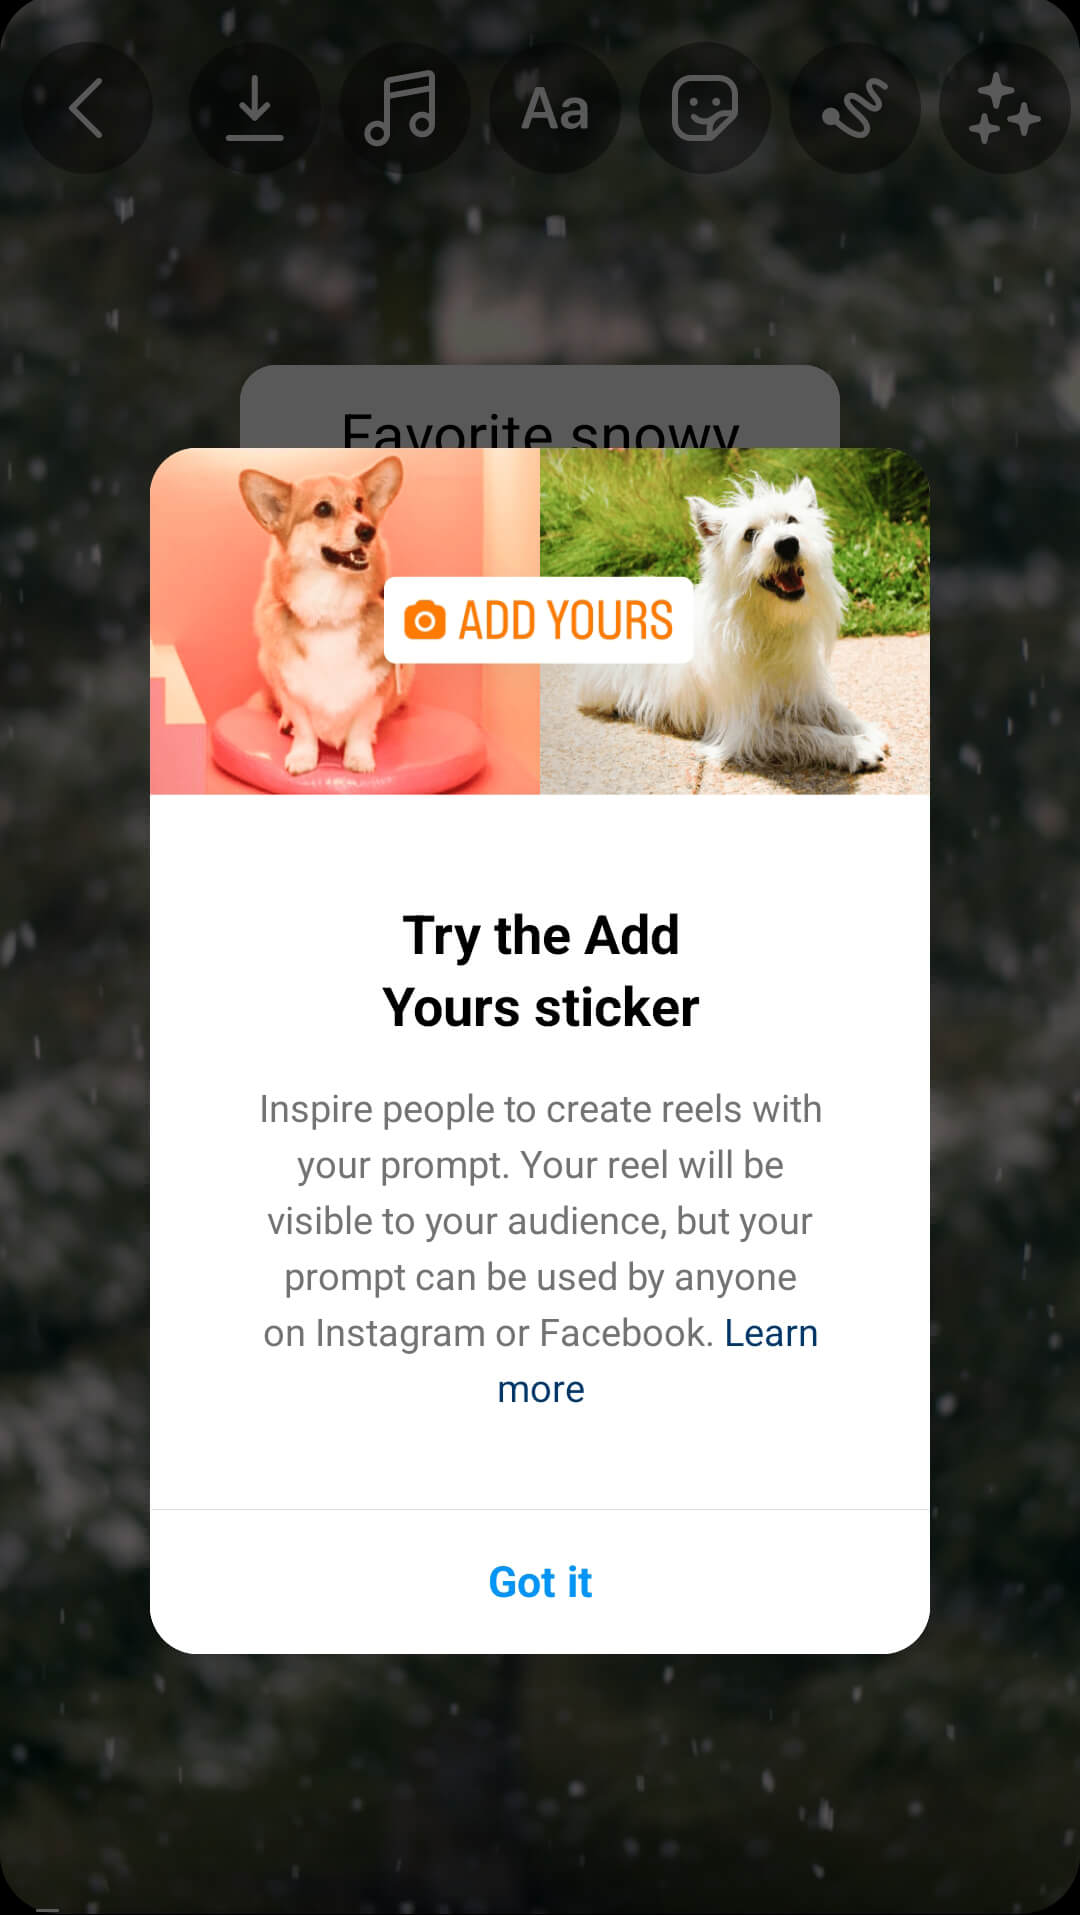 Instagram Stories Have a New Trend: The “Add Yours” Sticker